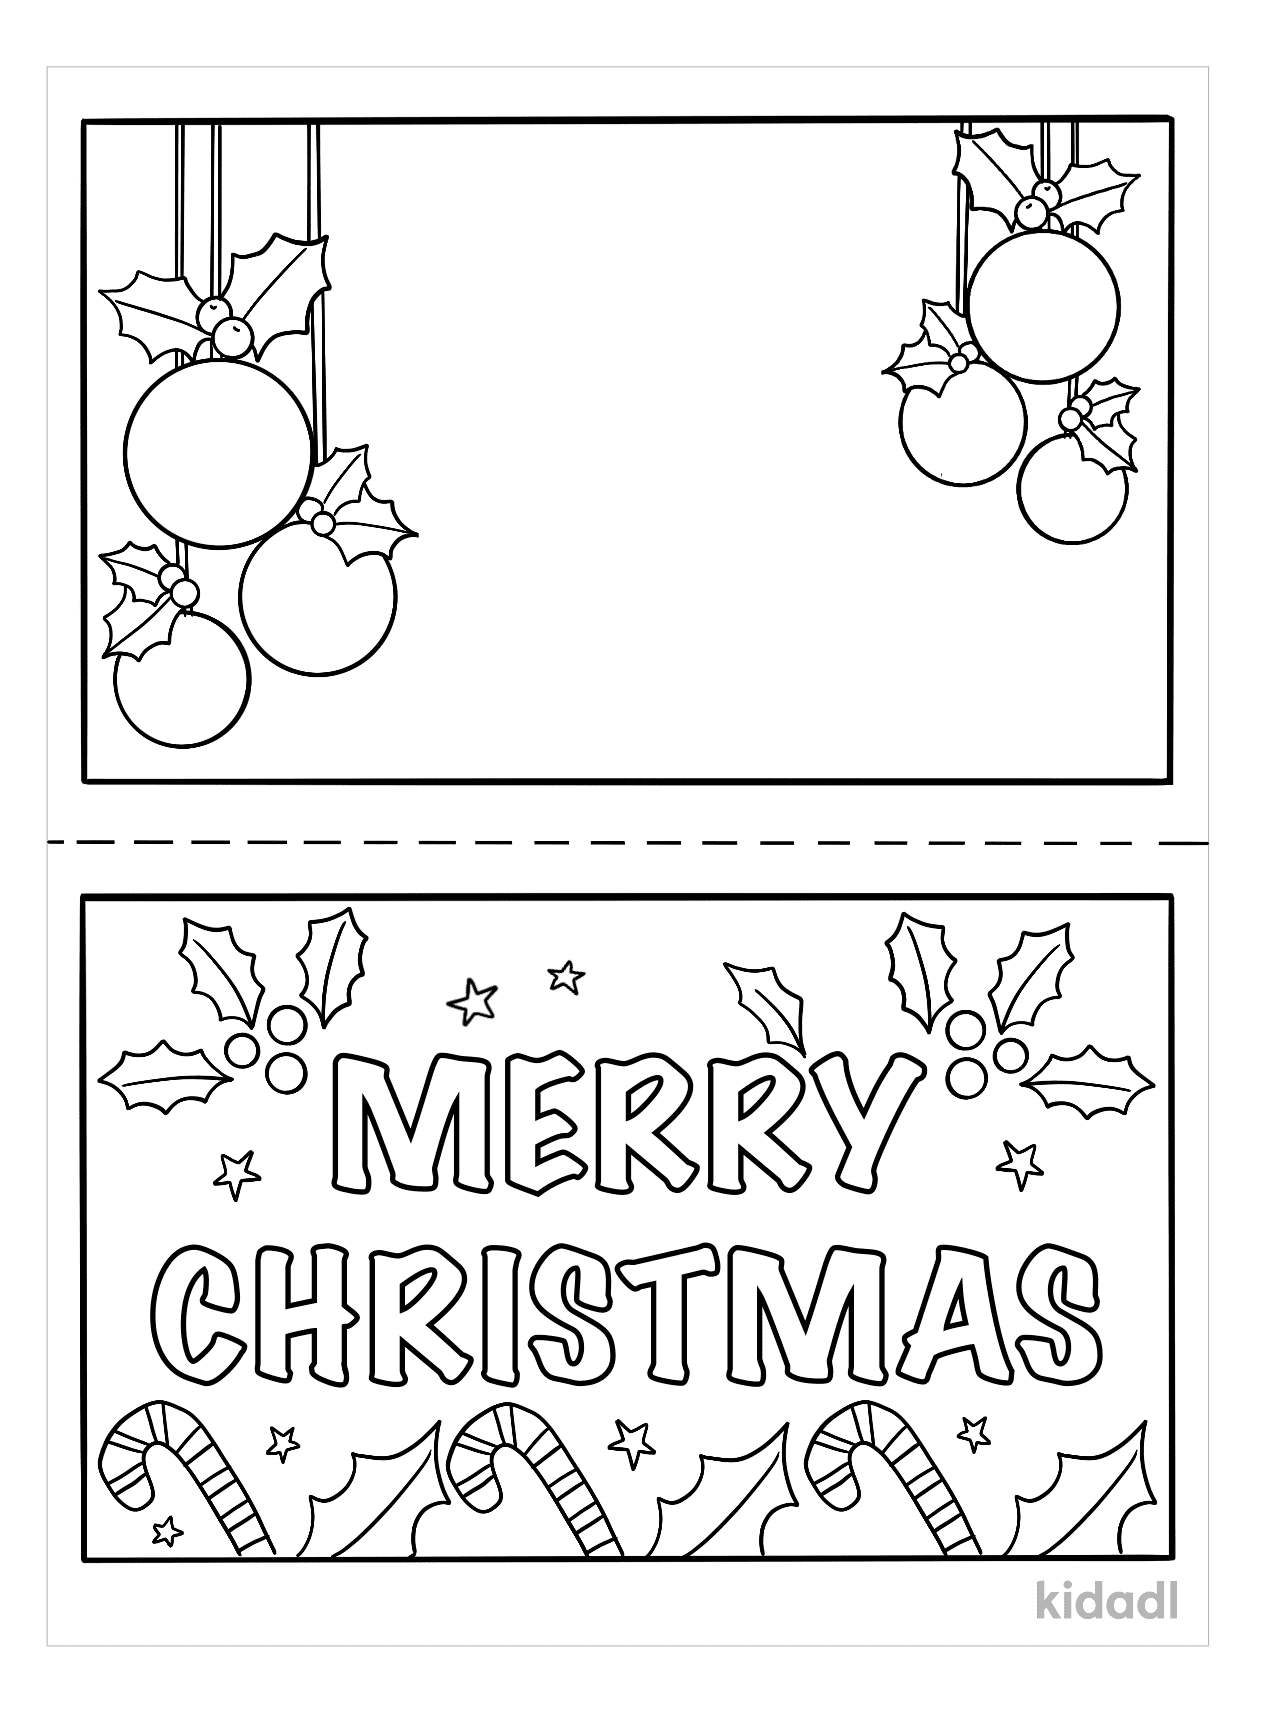 Lovely Merry Christmas Card Coloring Page